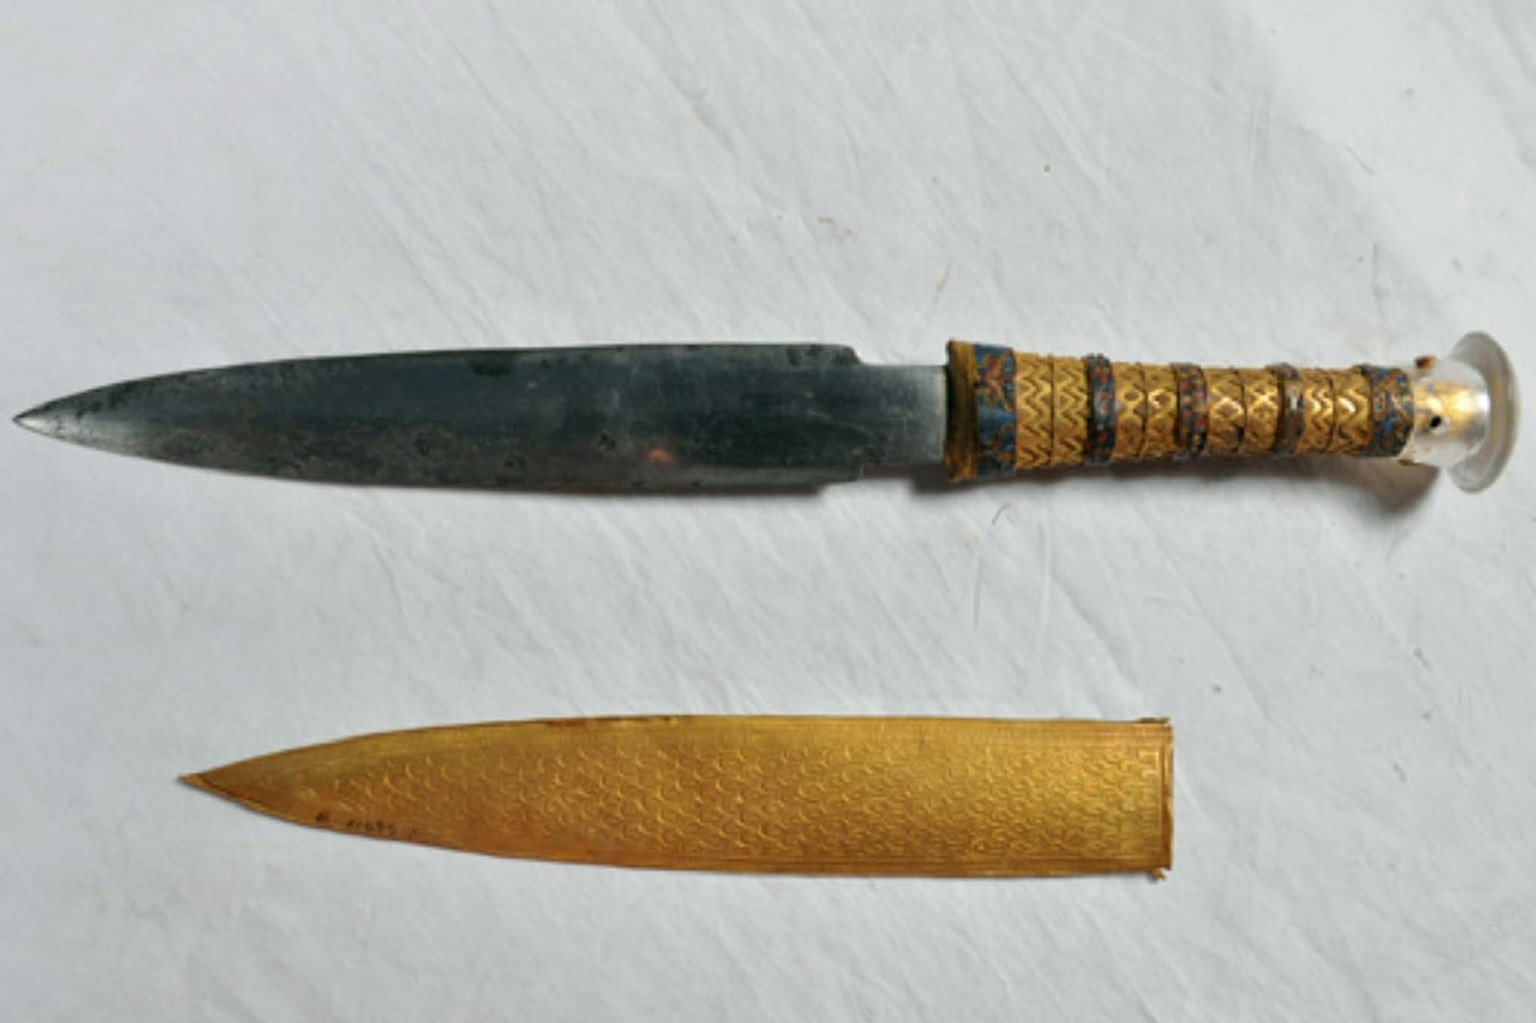 King Tut’s dagger was forged using iron from a meteorite.